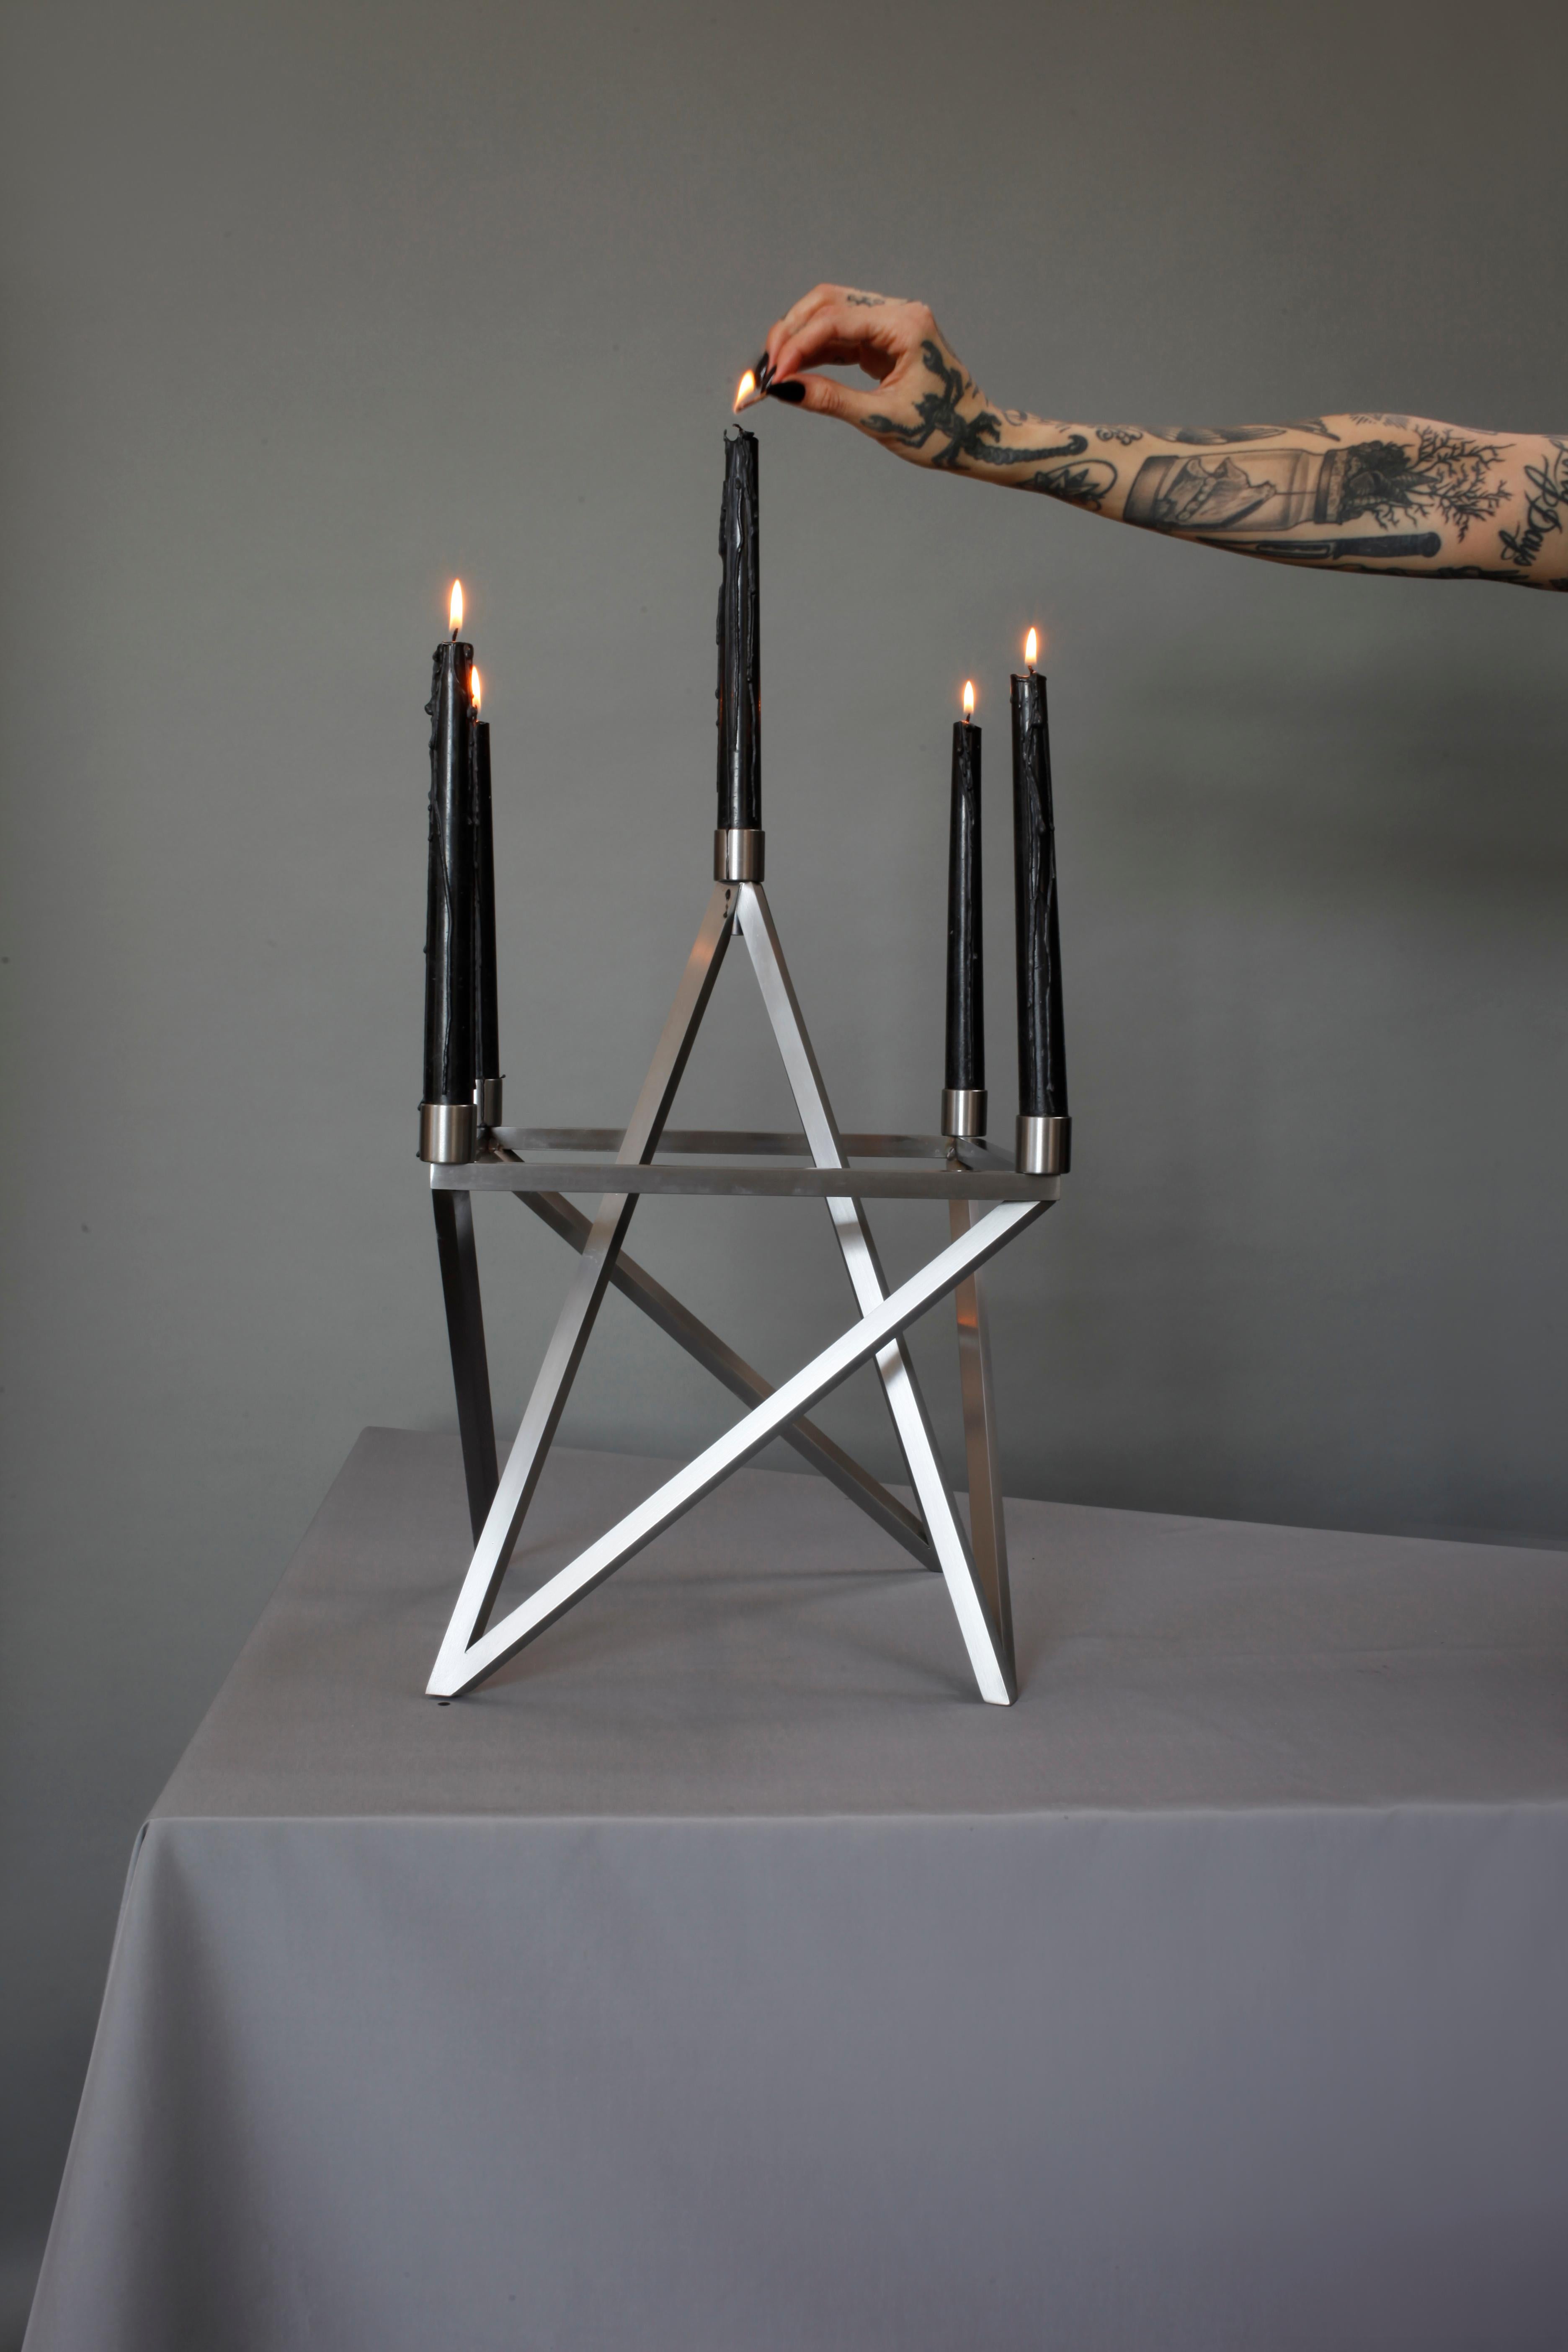 Contemporary 'Pagan' Candelabra by Material Lust, 2014 (Messing) im Angebot